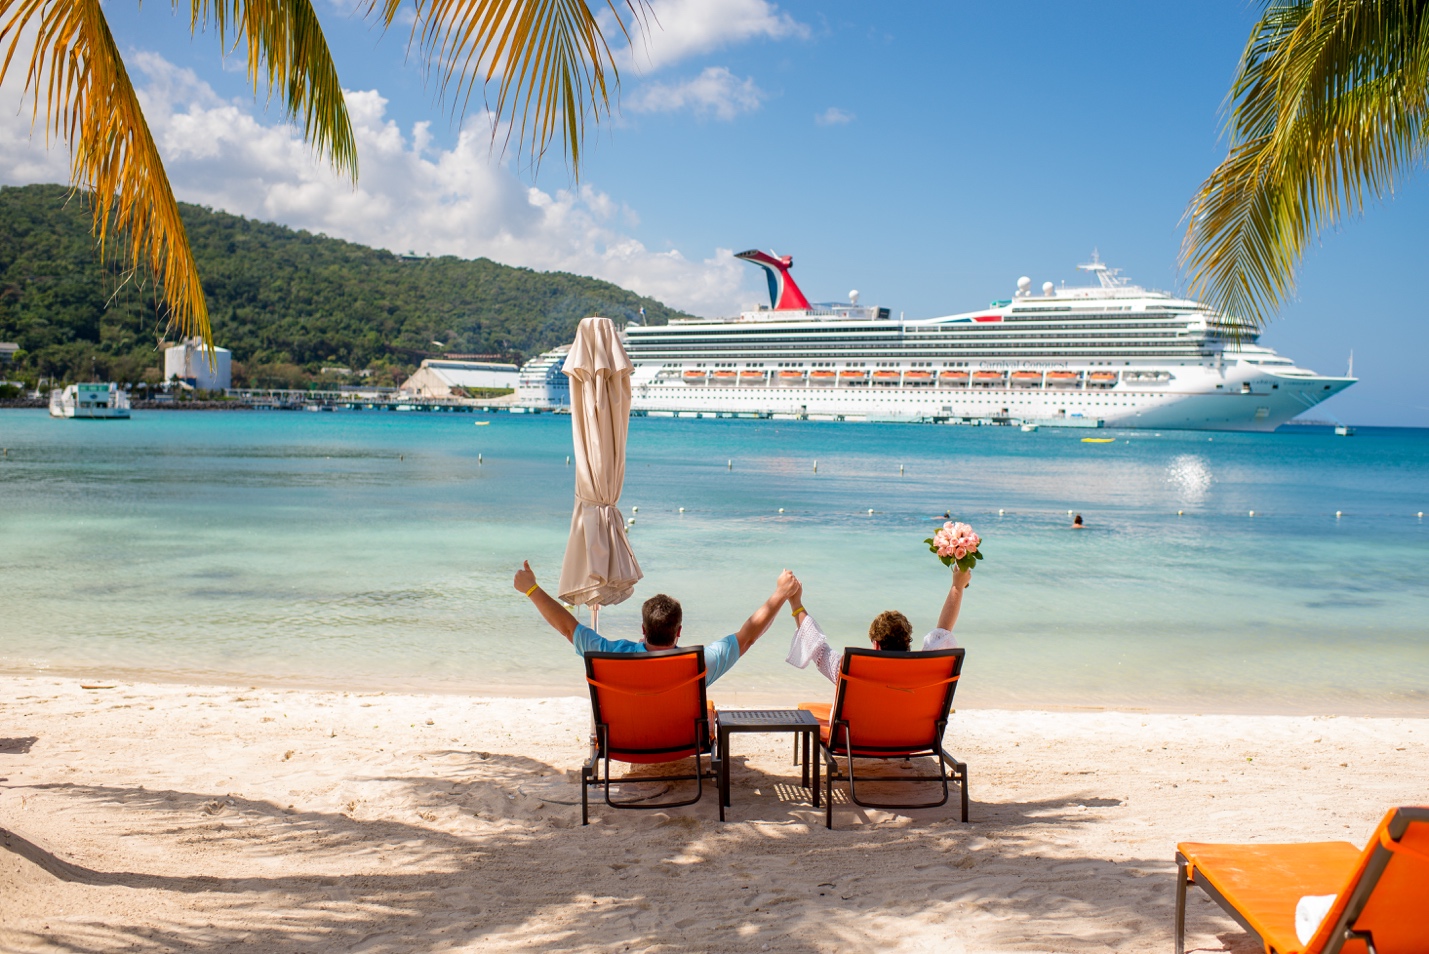 Curacao, Jamaica The Biggest Winners In The No-Storms Sweepstakes This Tourism Season ... Cruises Diverted There